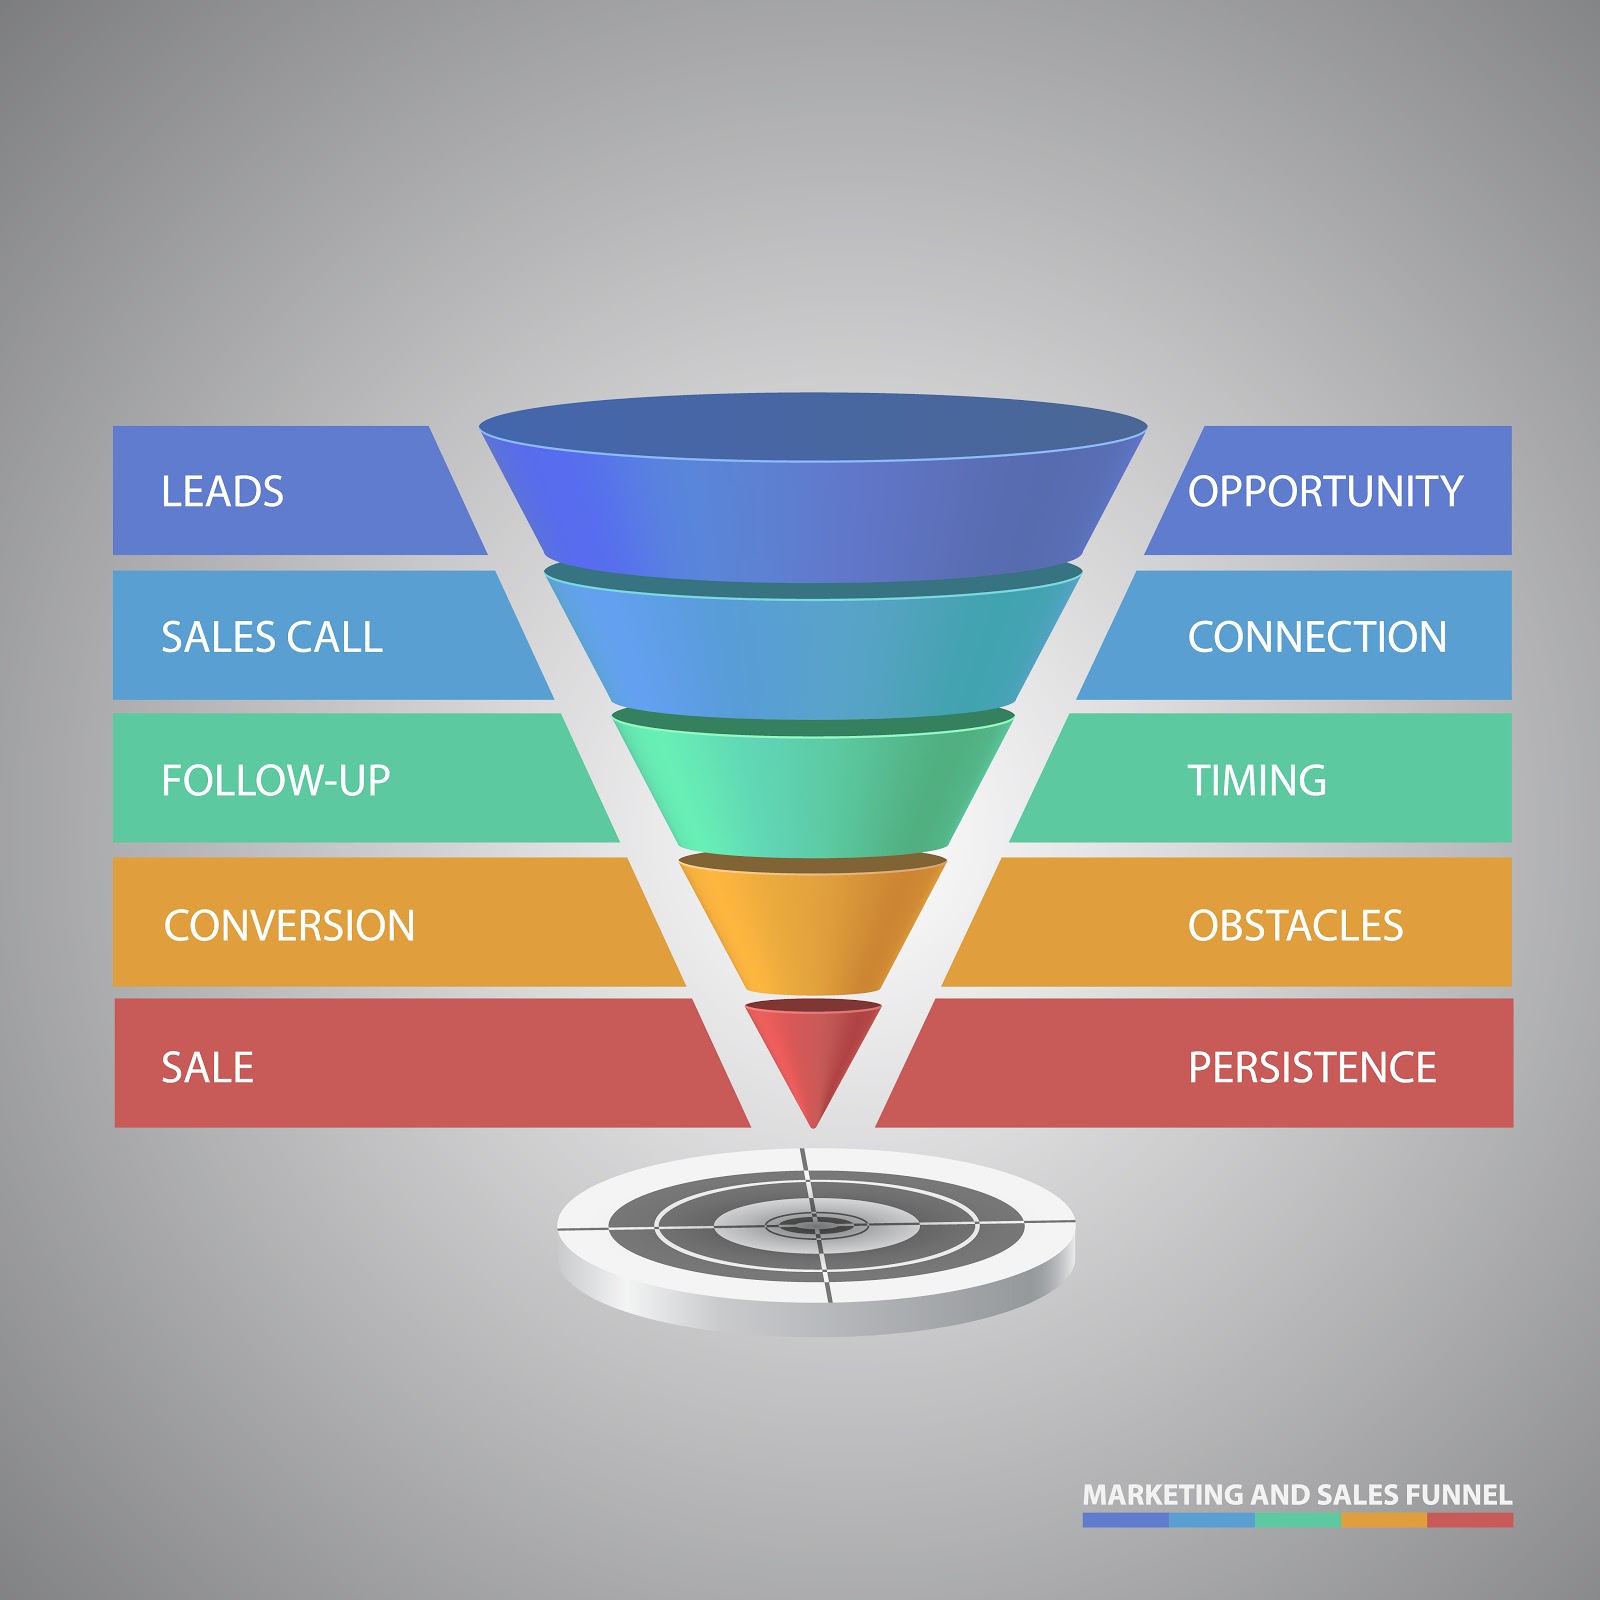 What Is a Sales Funnel? how to use a lead magnet?